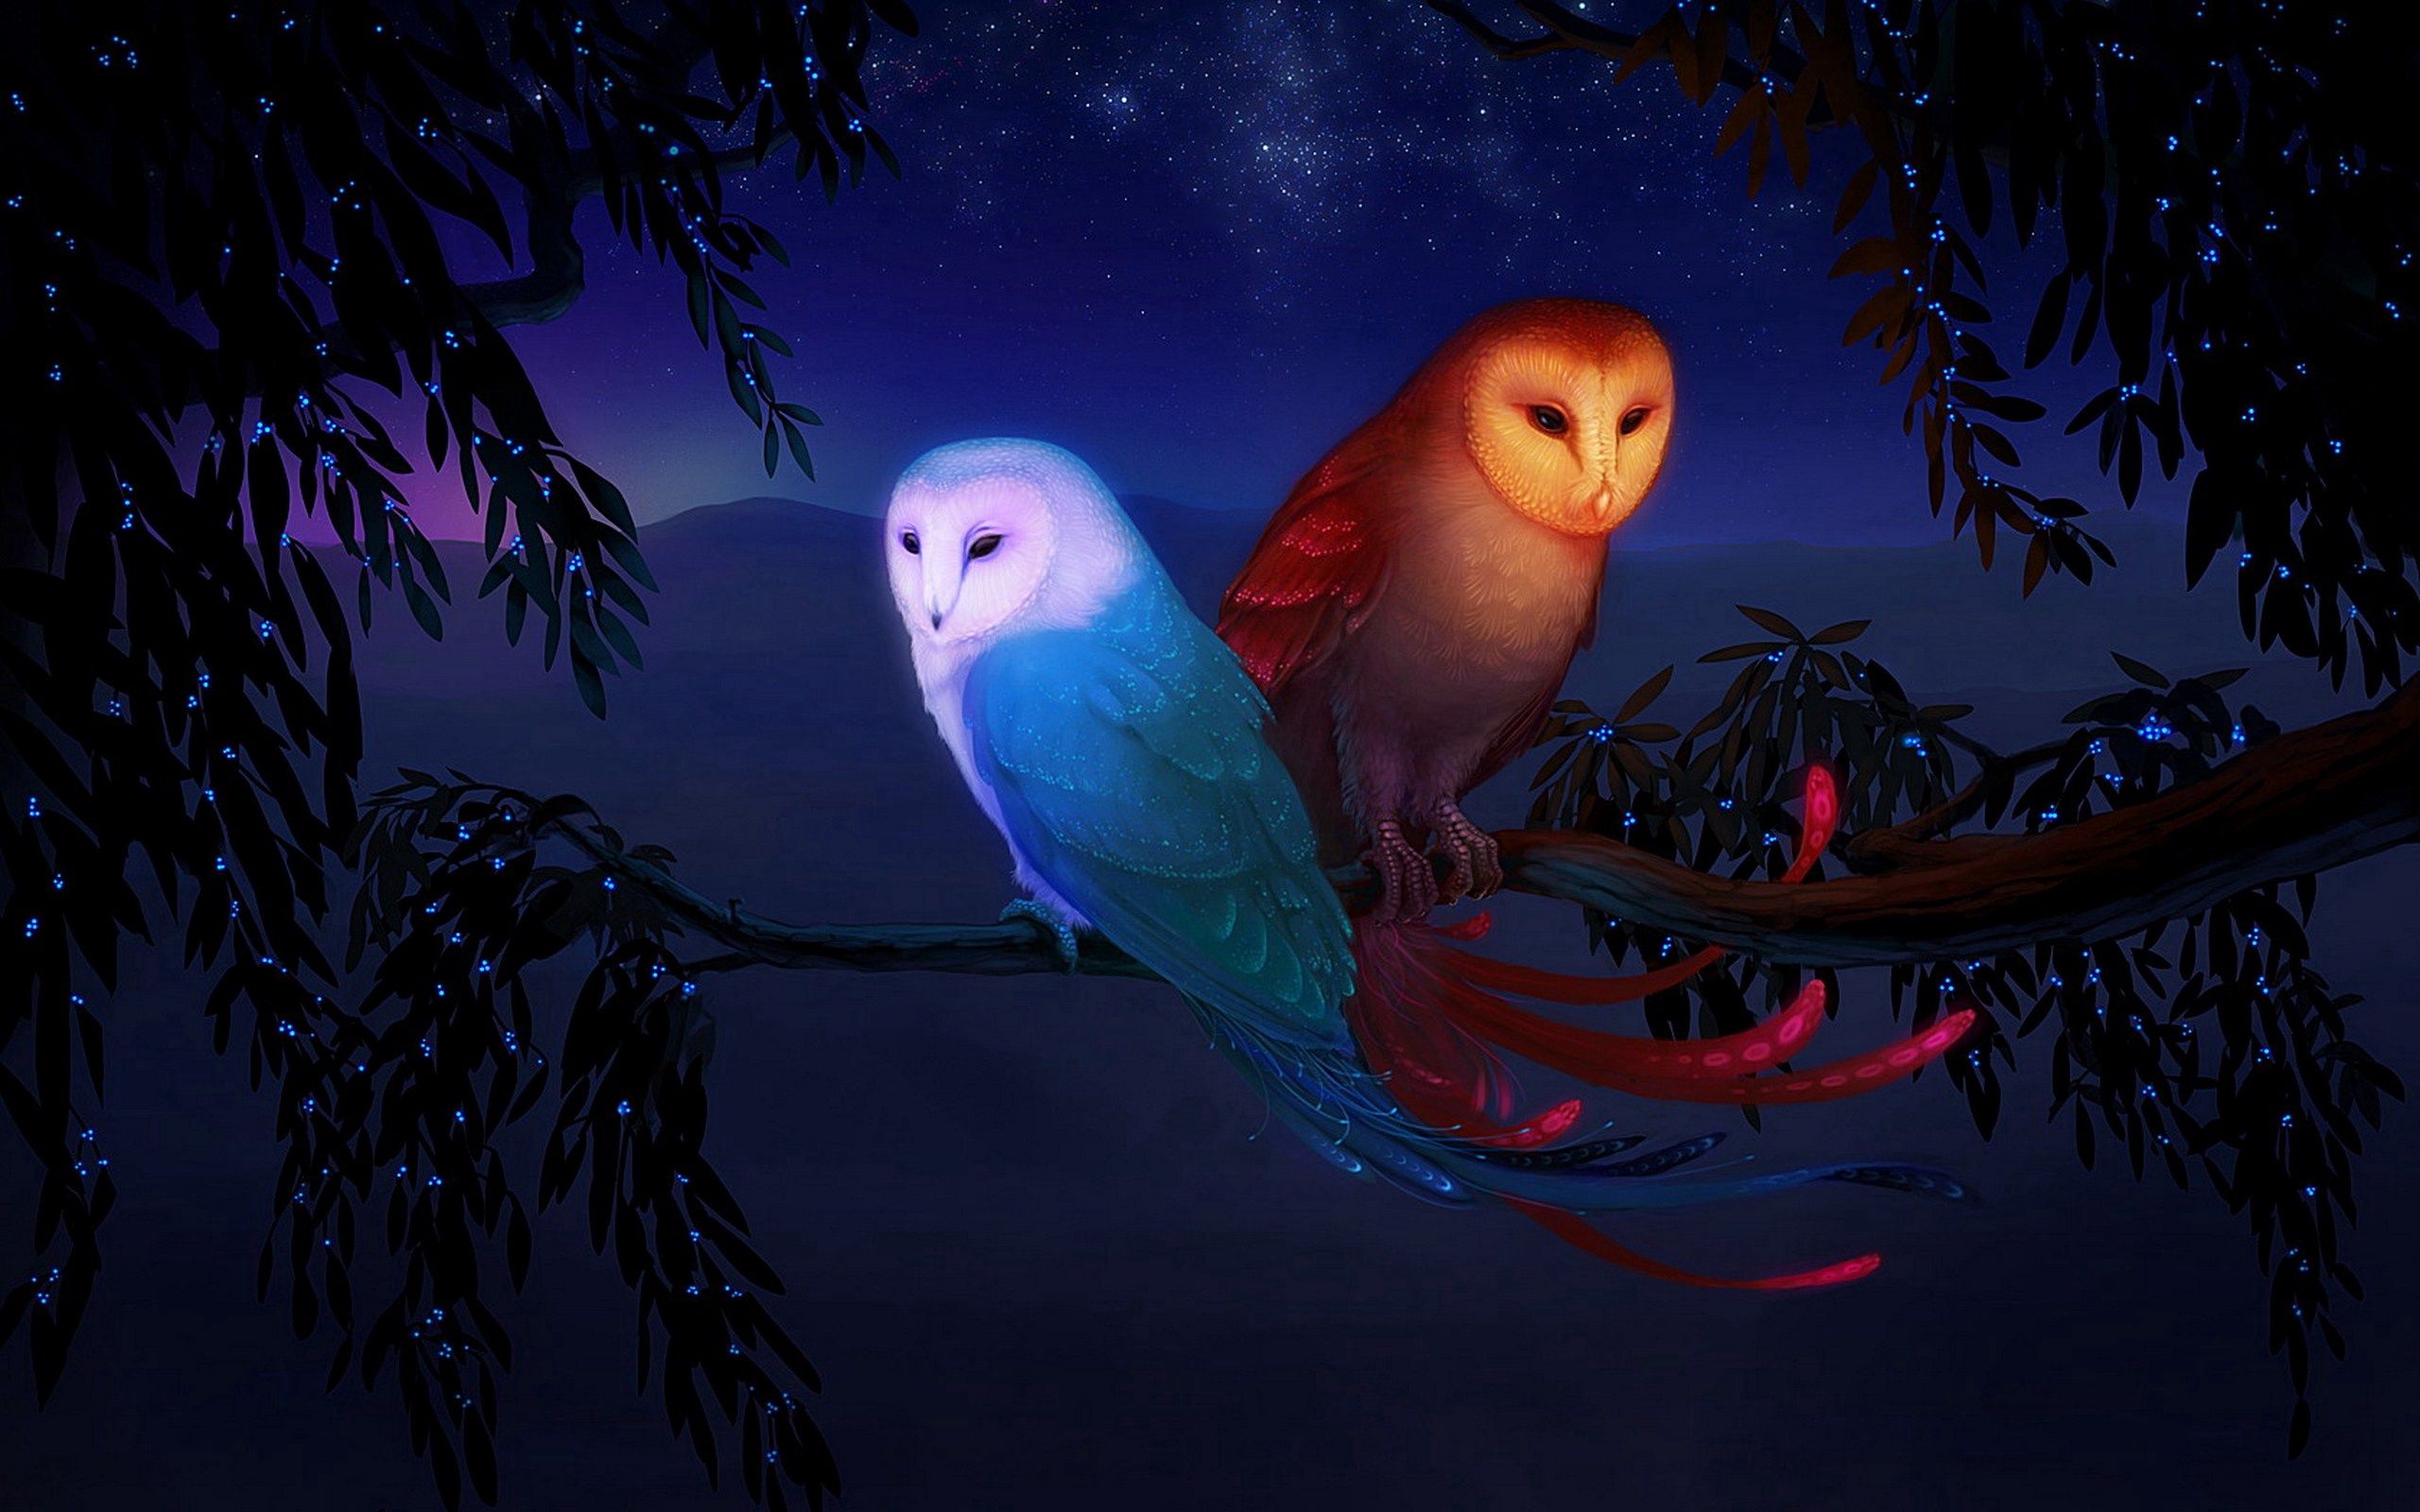 81187 download wallpaper owl, art, birds, night, branch screensavers and pictures for free